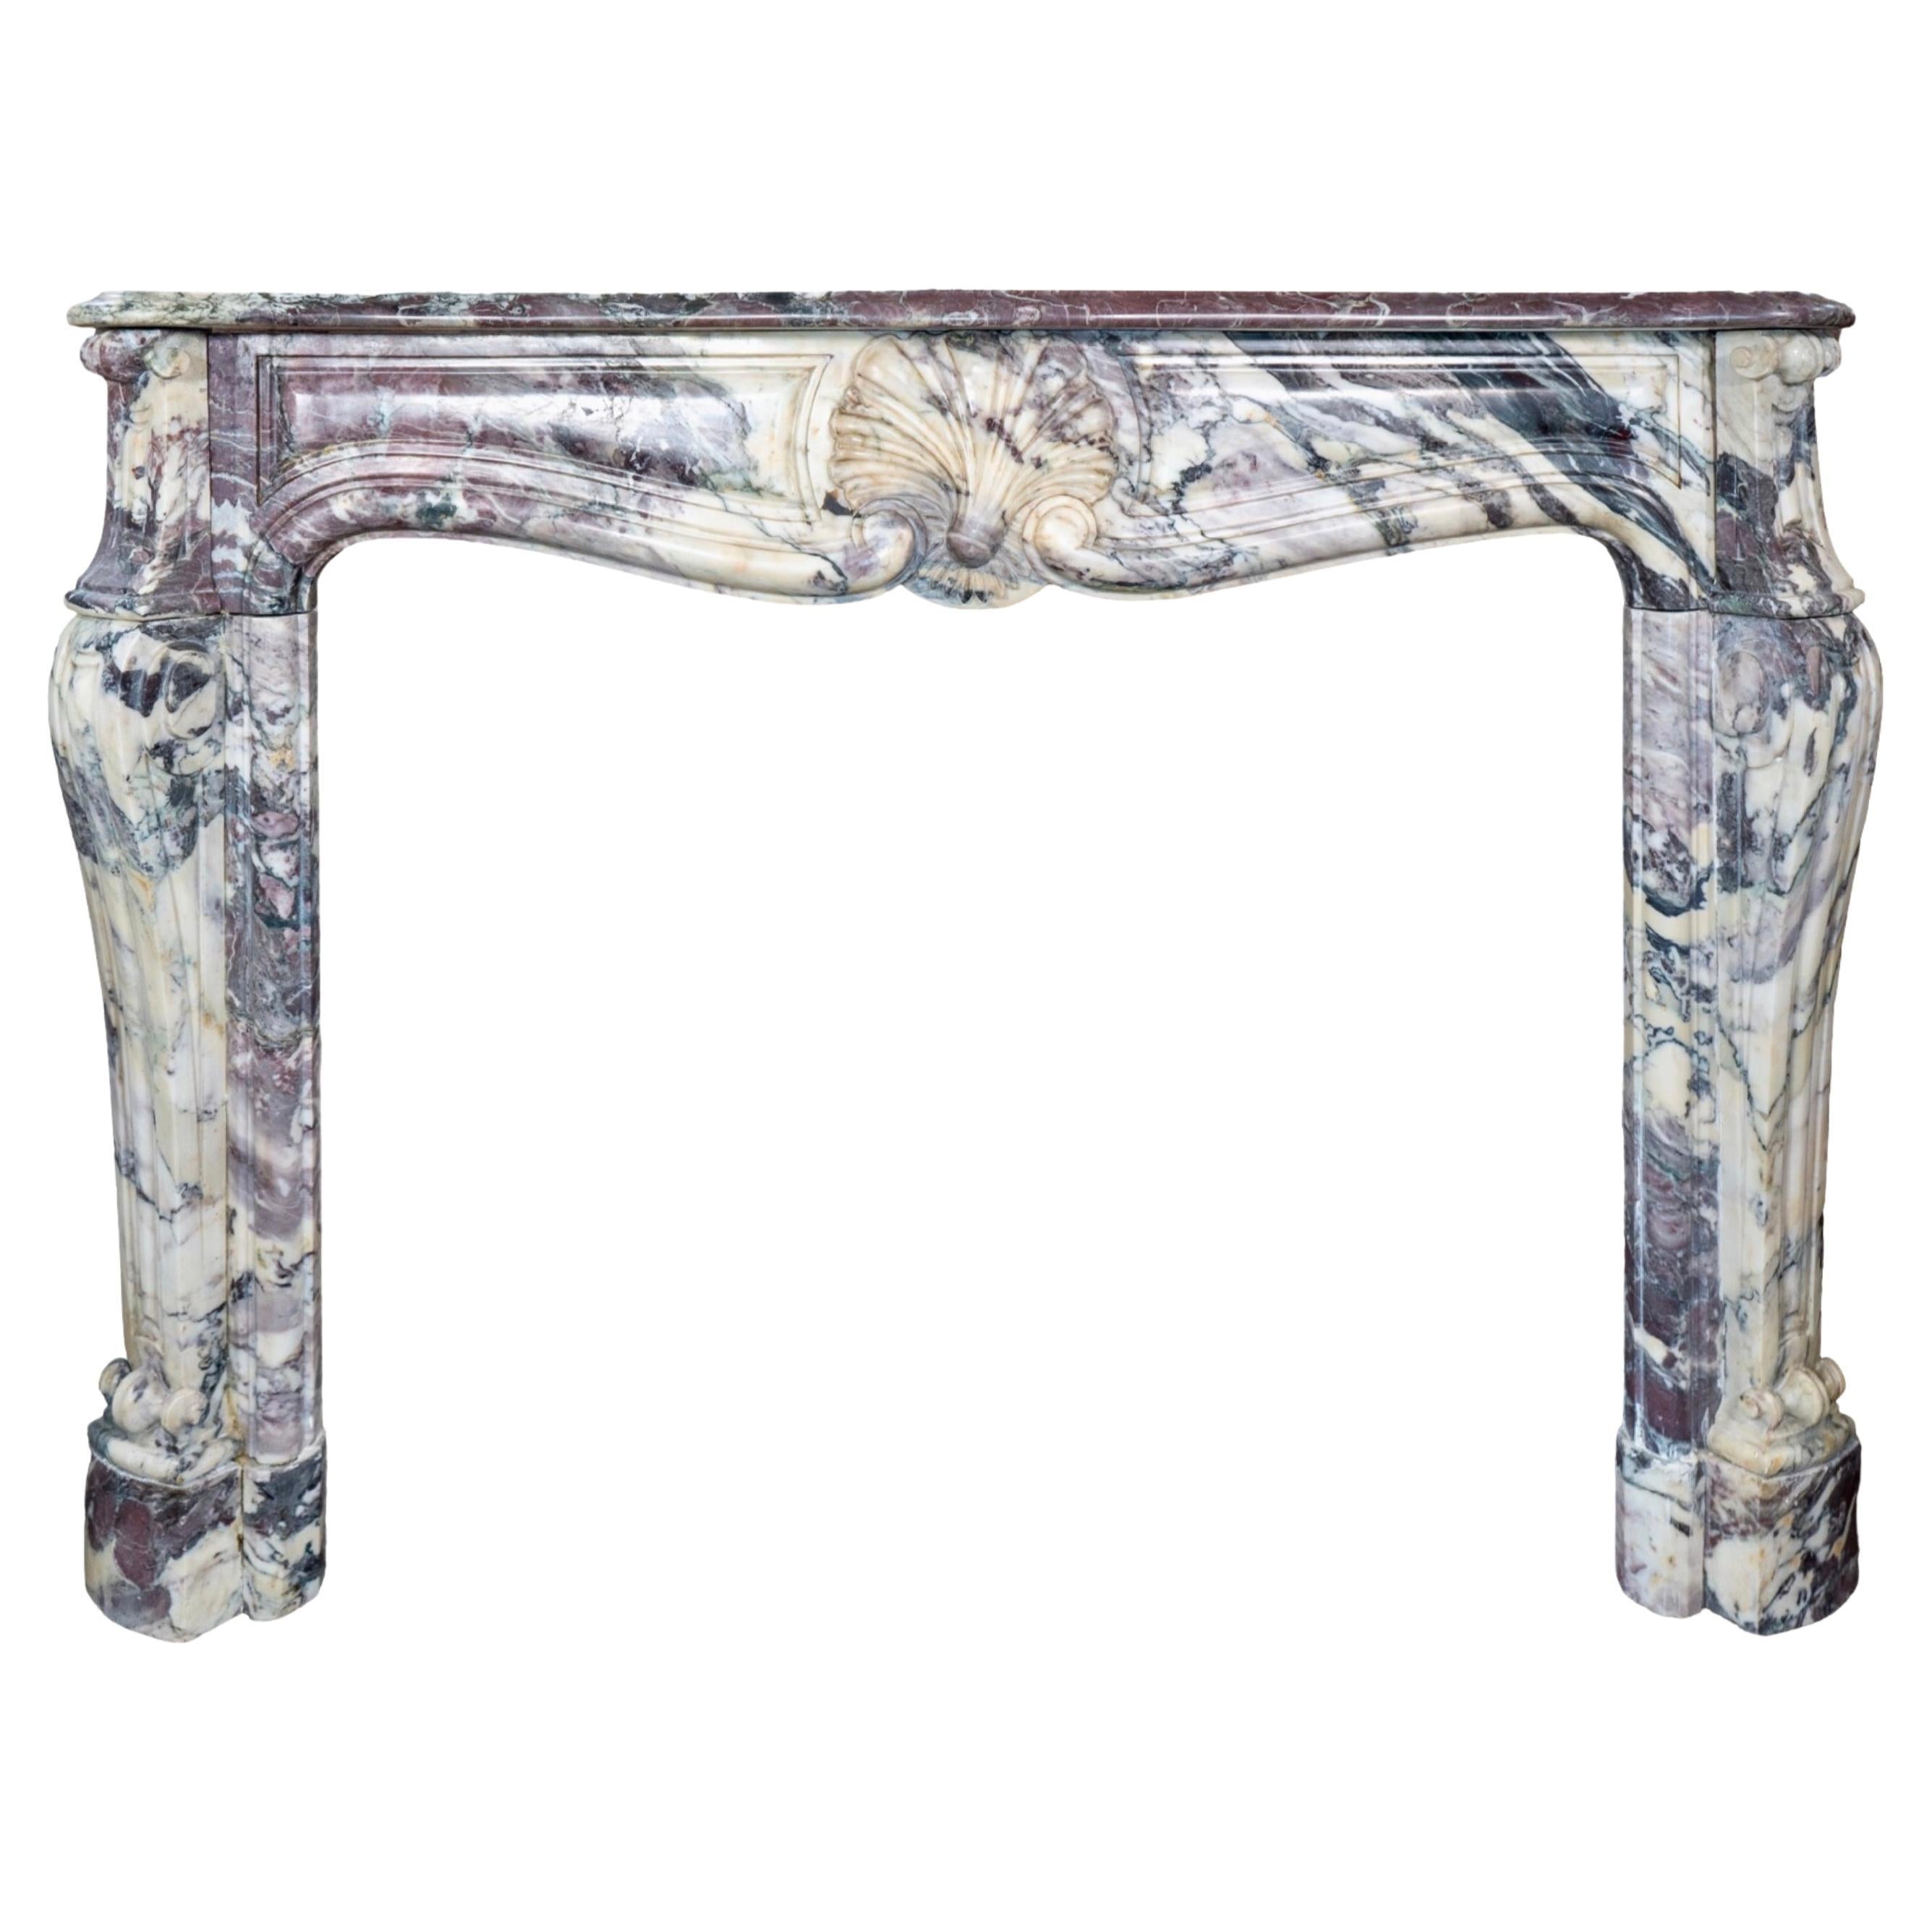 French Villefranche Peach Flower Marble Mantel For Sale